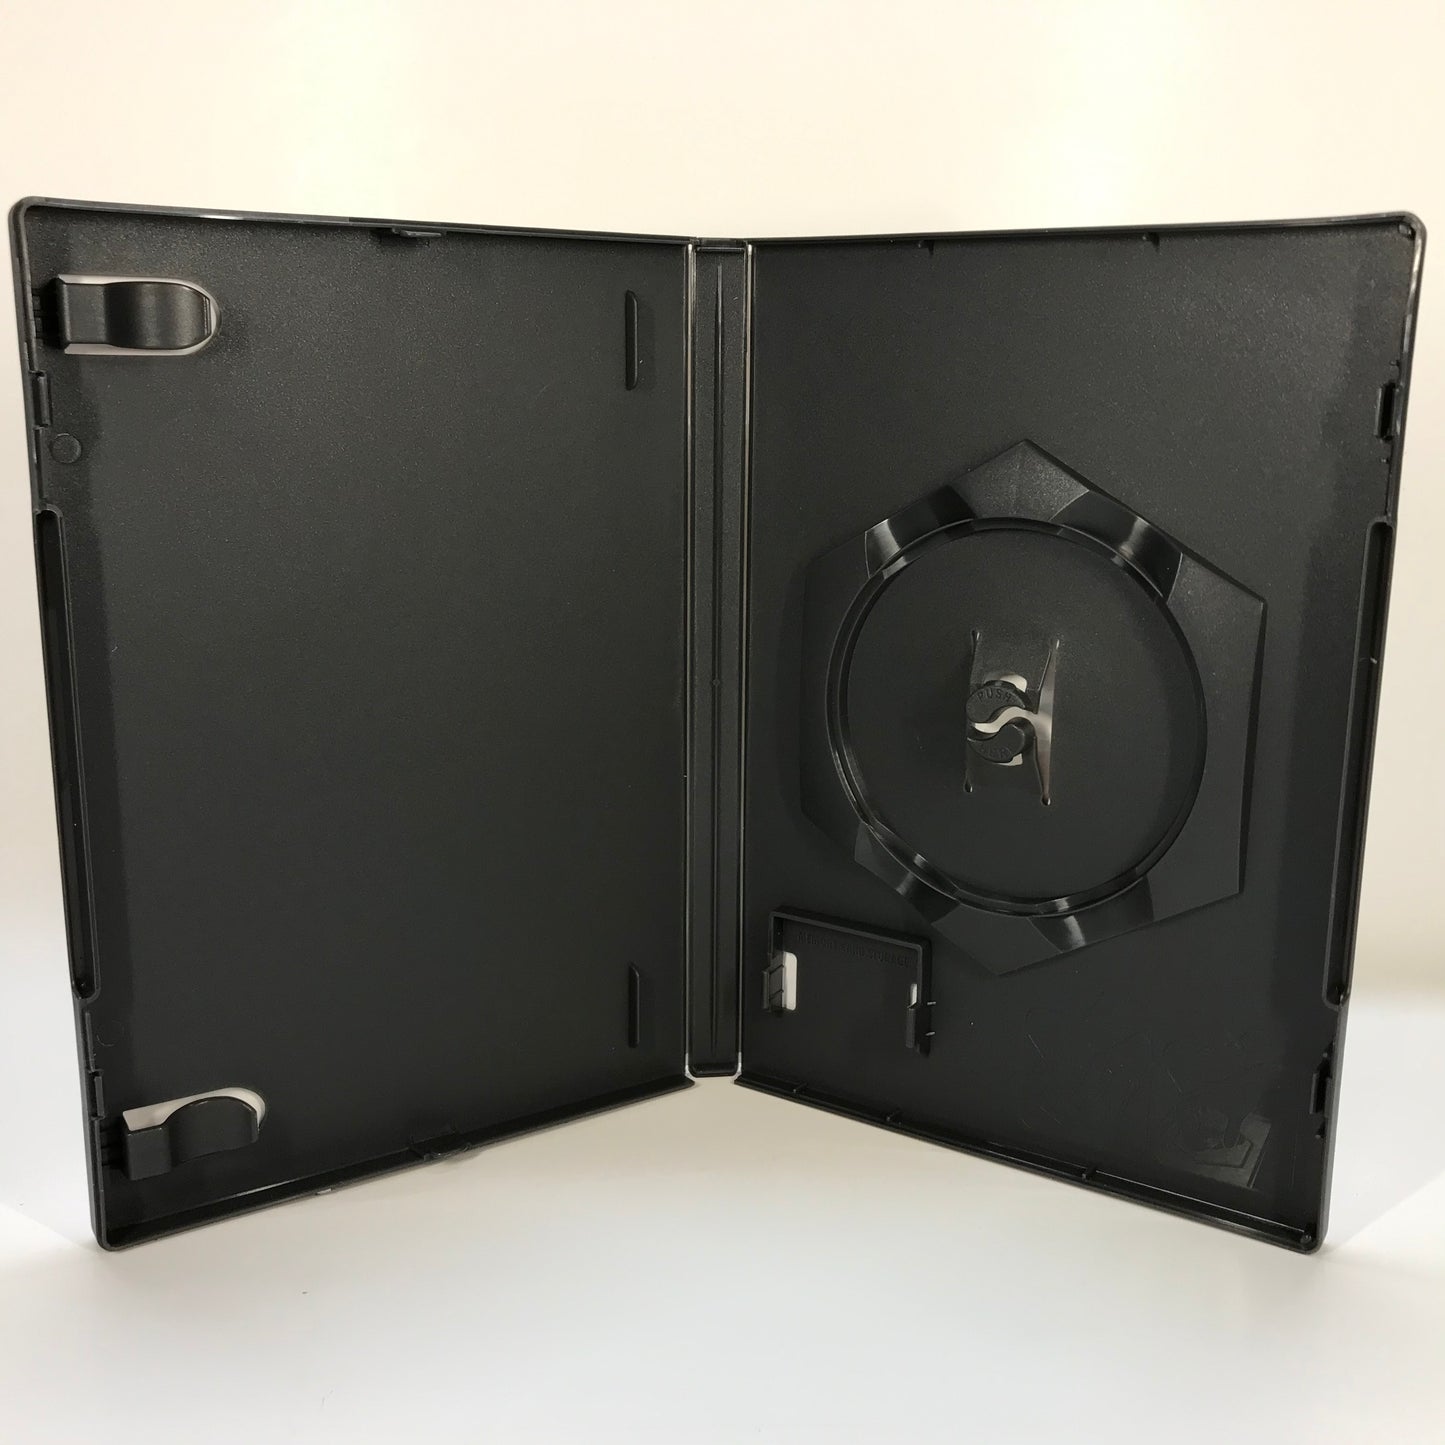 GameCube Replacement Case - NO GAME - Dead to Rights